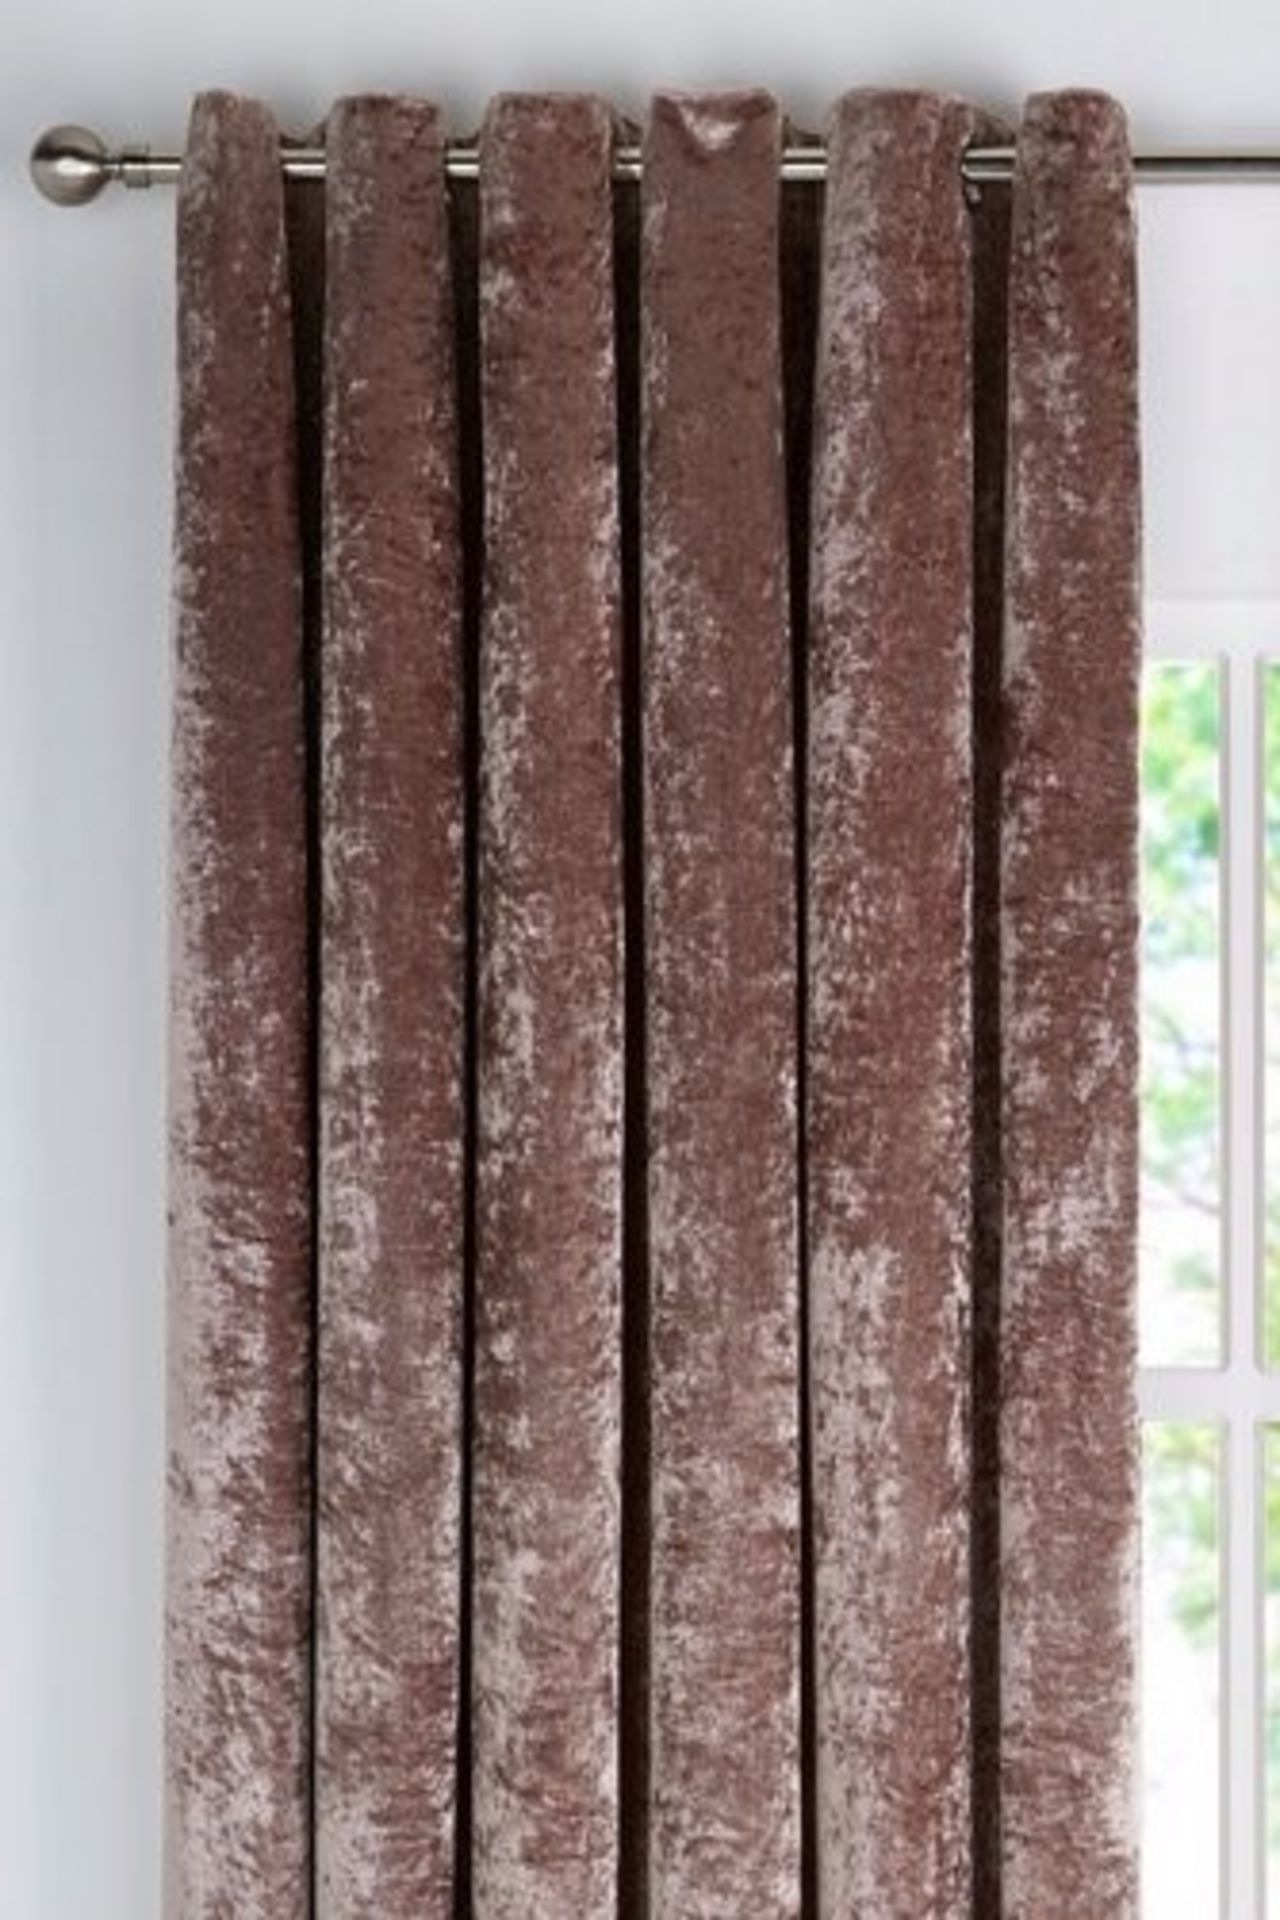 1 PACKAGED PAIR OF CRUSHED VELVET FULLY LINED, EYELET CURTAINS IN MINK, APPROX 168CM X 182CM (